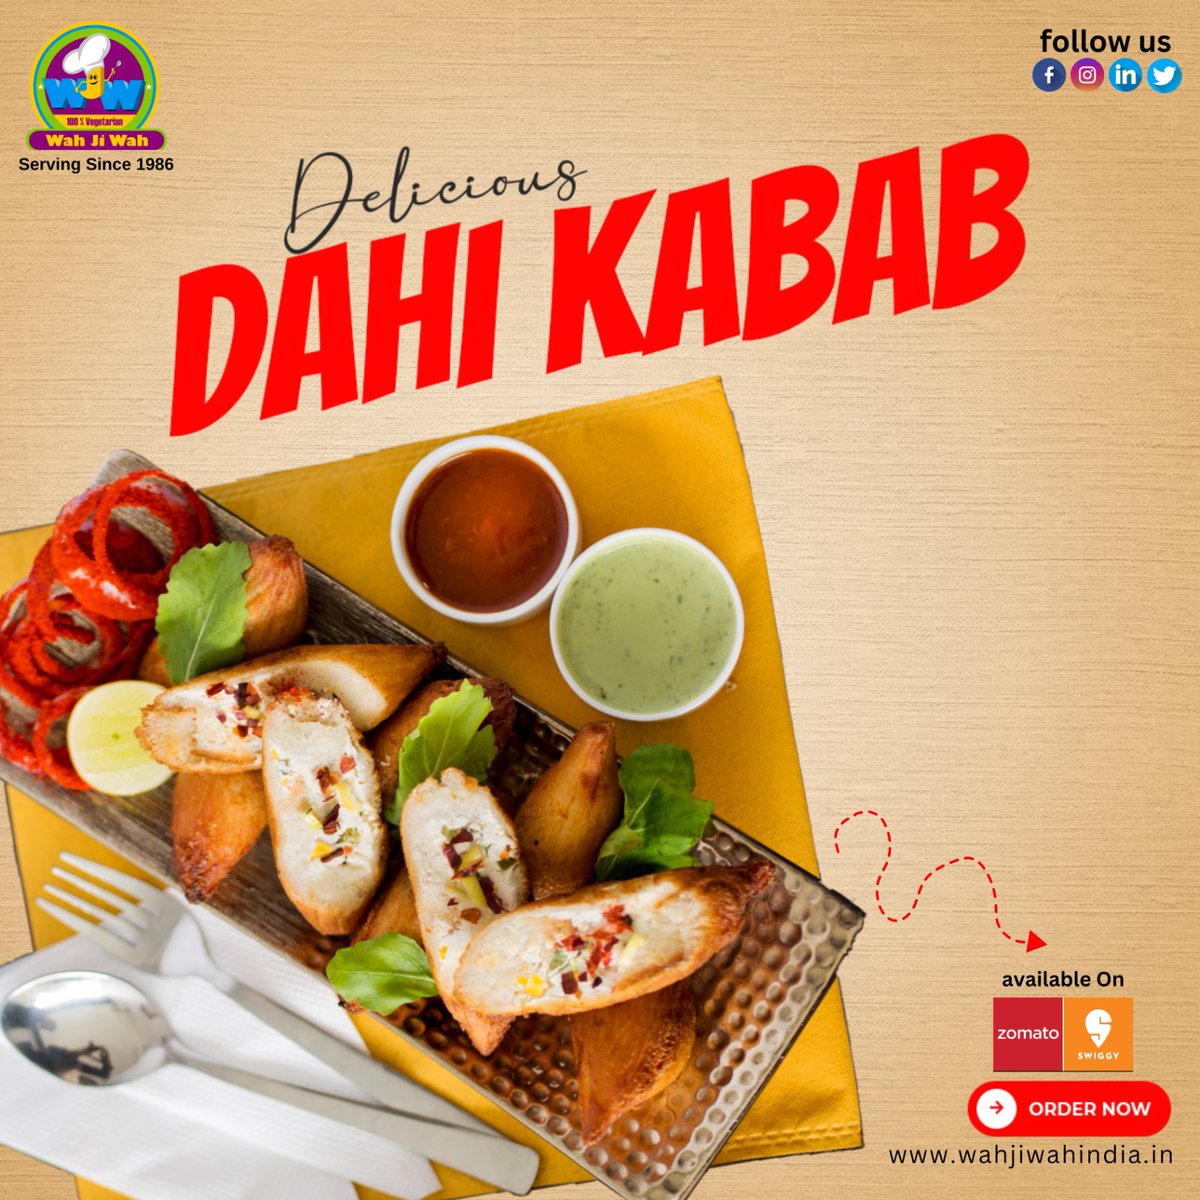 Wah Ji Wah
Serving Since 1986
Kabab your way to happiness!
.
.
available On zomato and SWIGGY
wahjiwahindia.in
Call us now to order. +91 9811866587
.
.
#Food #wahjiwah #Healthyfood #Gravwebsolution #momos #Newdelhifood #Indiafood #delicious #deliciousfood #tandoorichaap